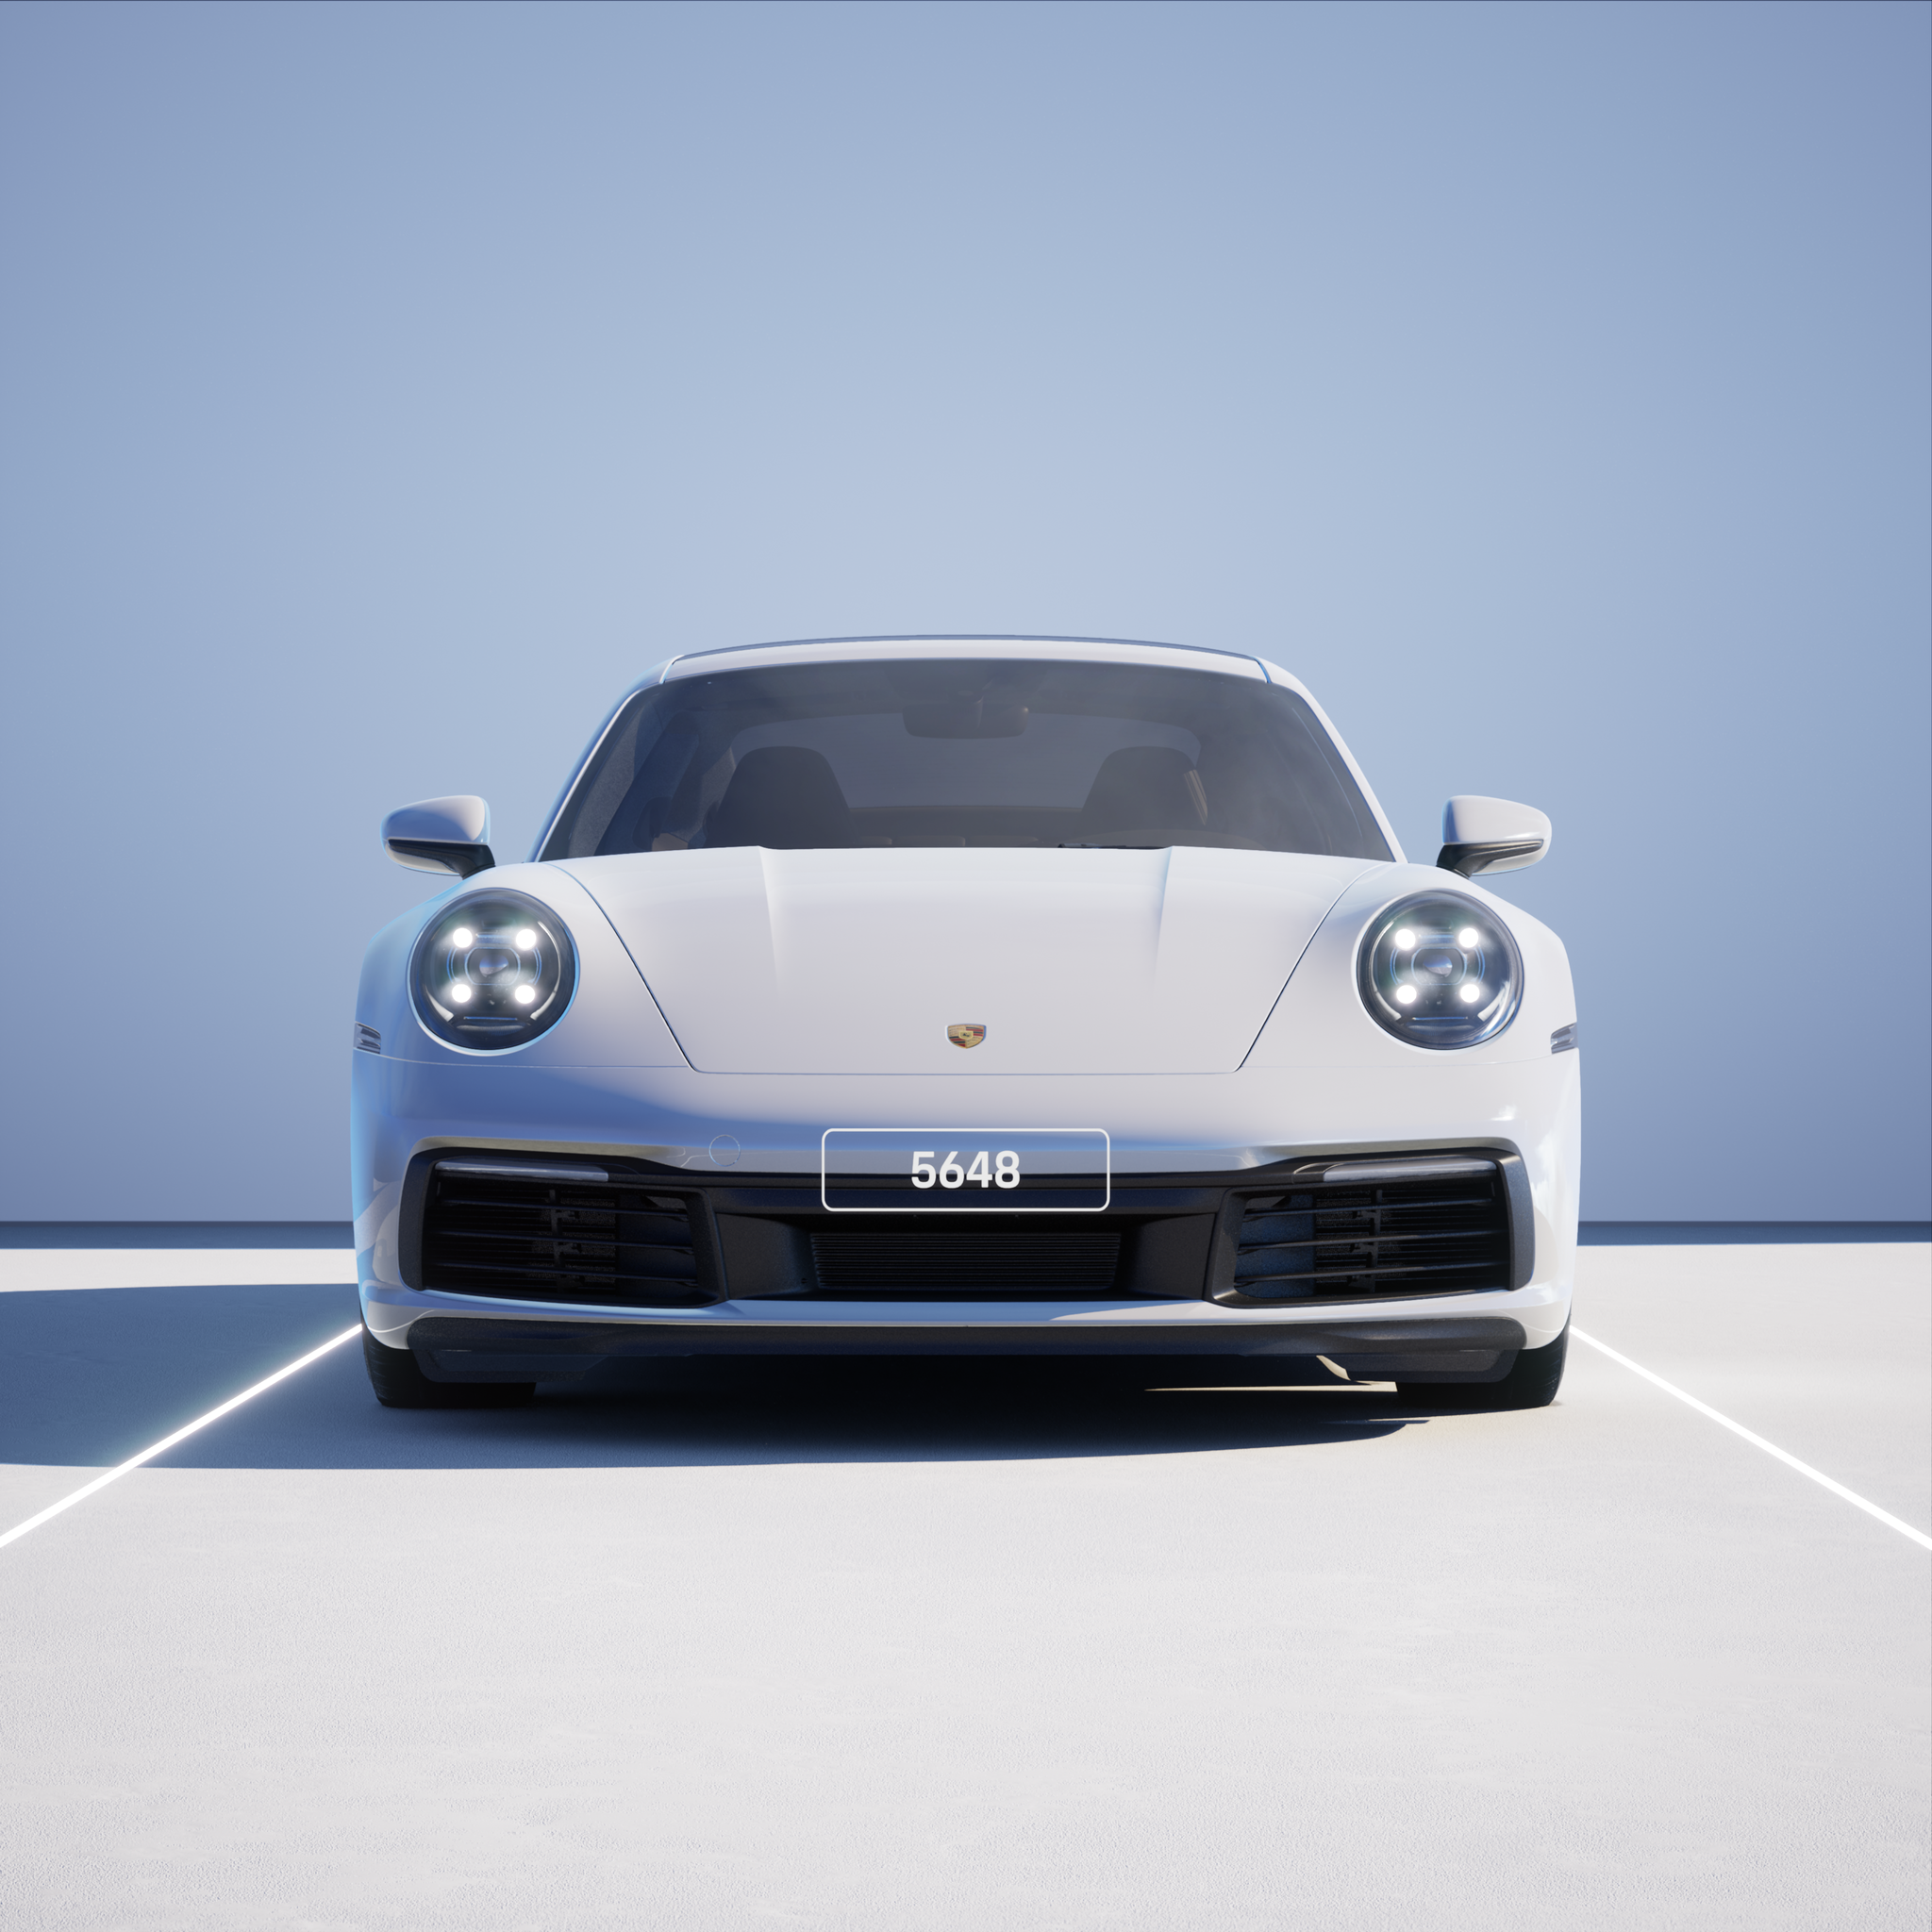 The PORSCHΞ 911 5648 image in phase